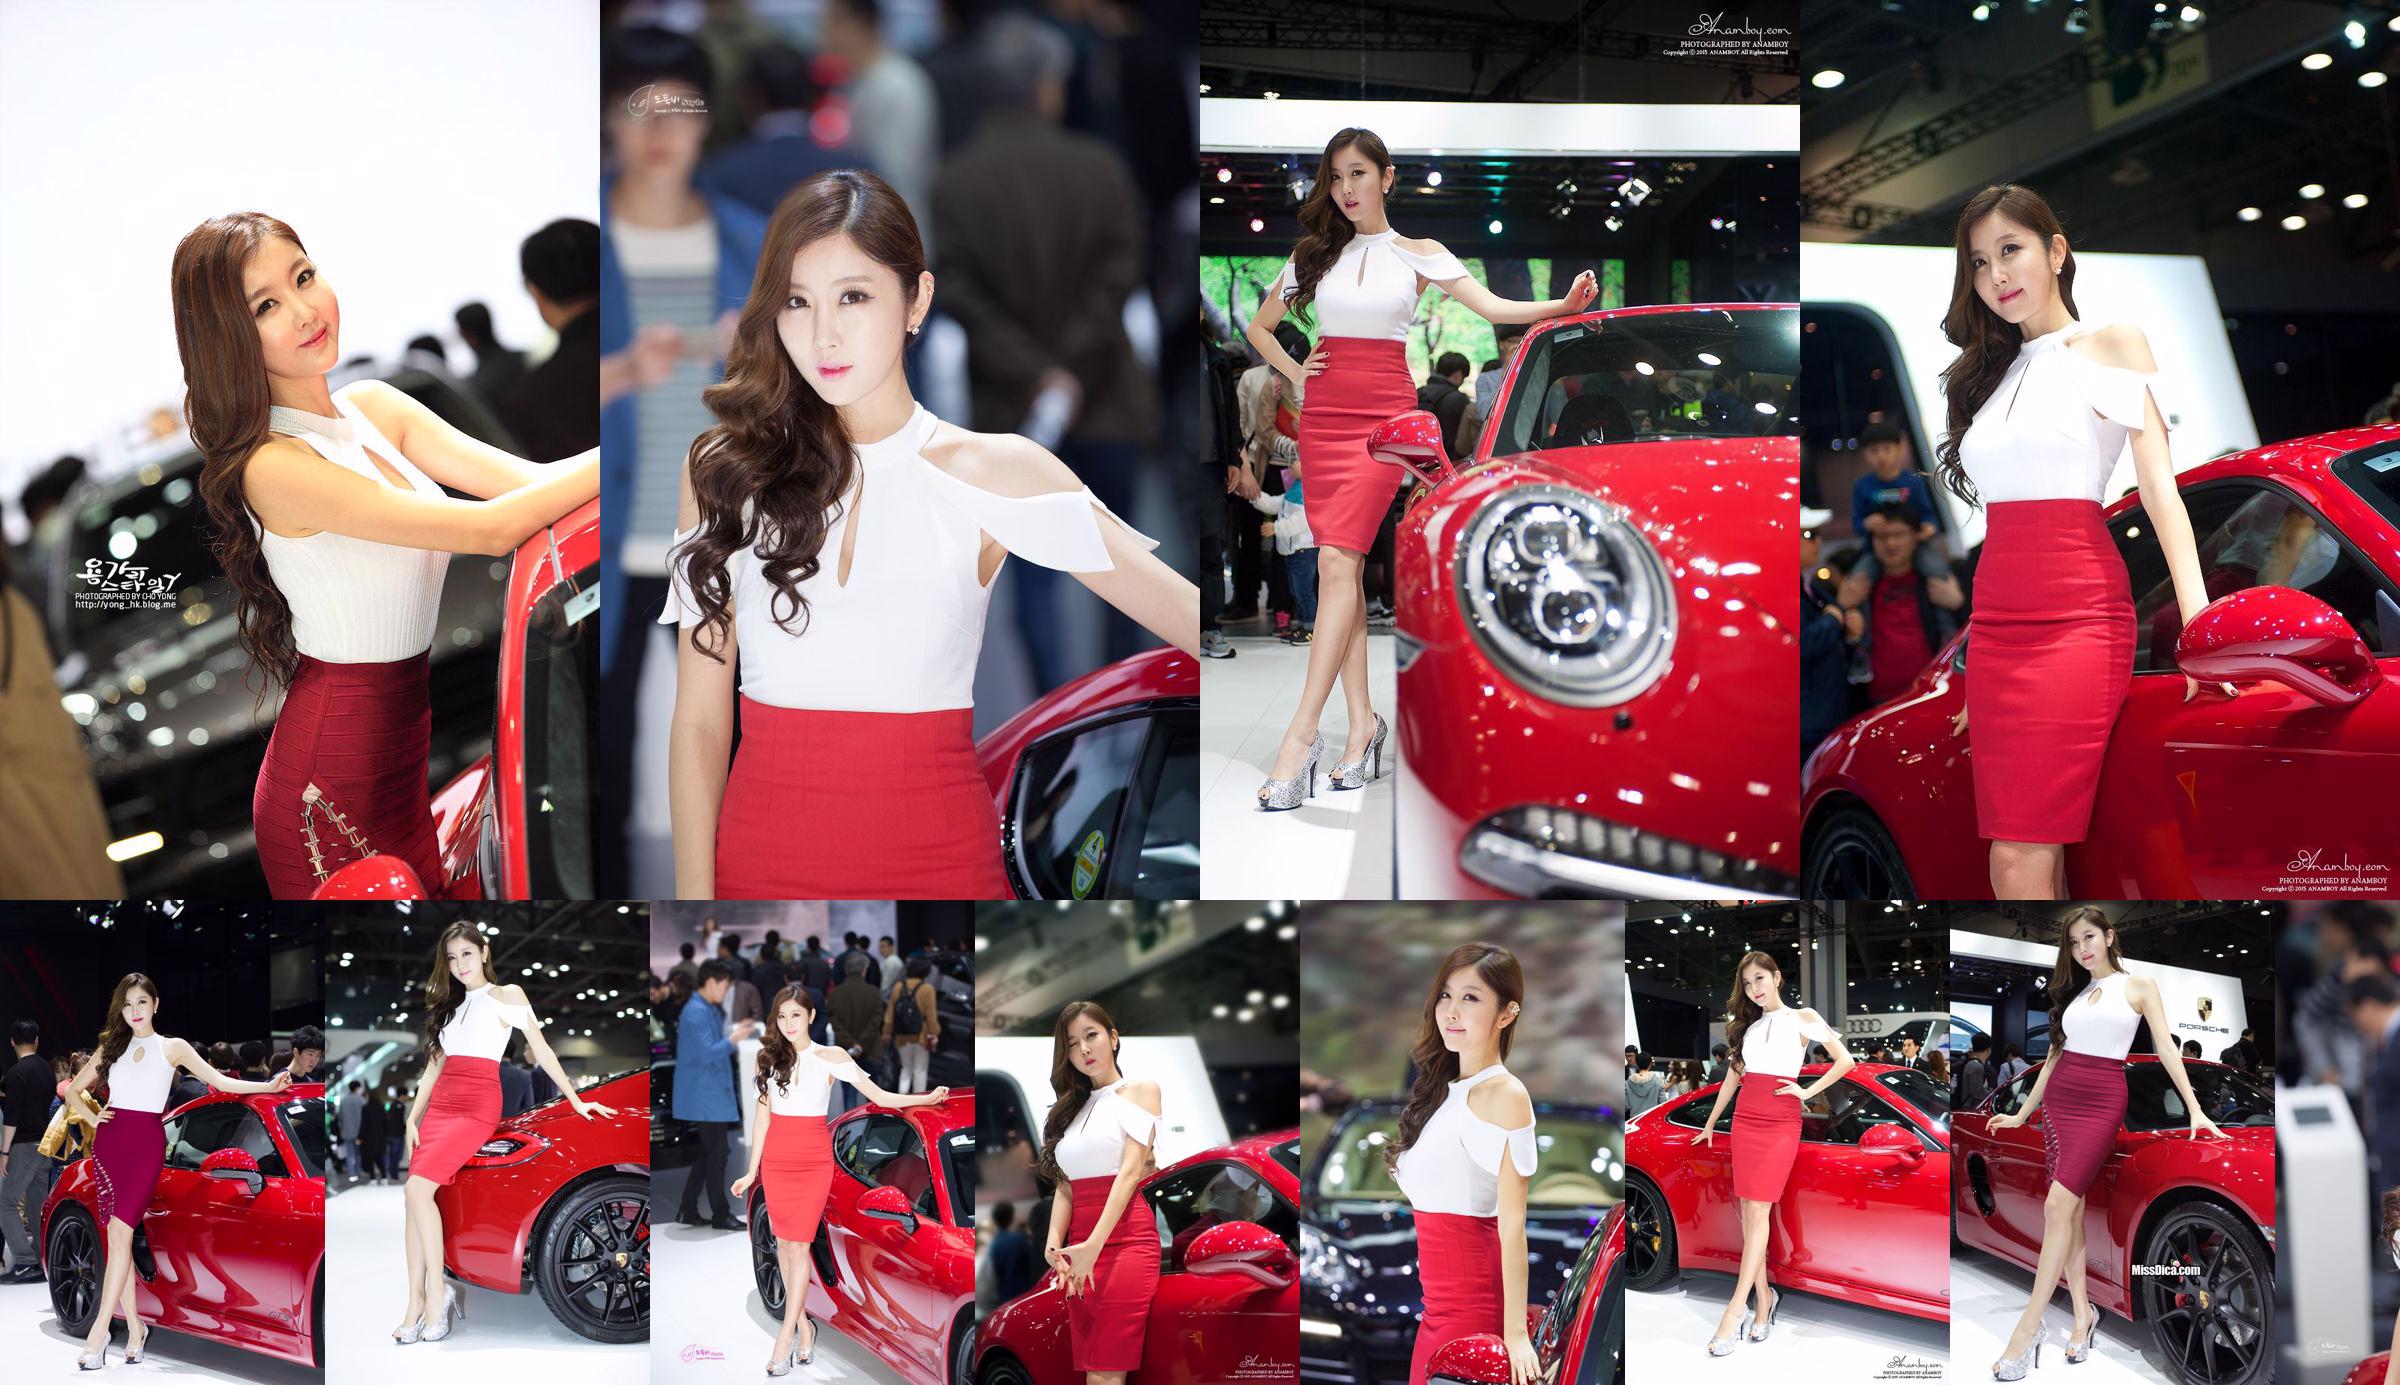 Photo Collection of Korean Car Model Cui Xingya/Cui Xinger's "Red Skirt Series at Auto Show" No.dd6ea6 Page 1